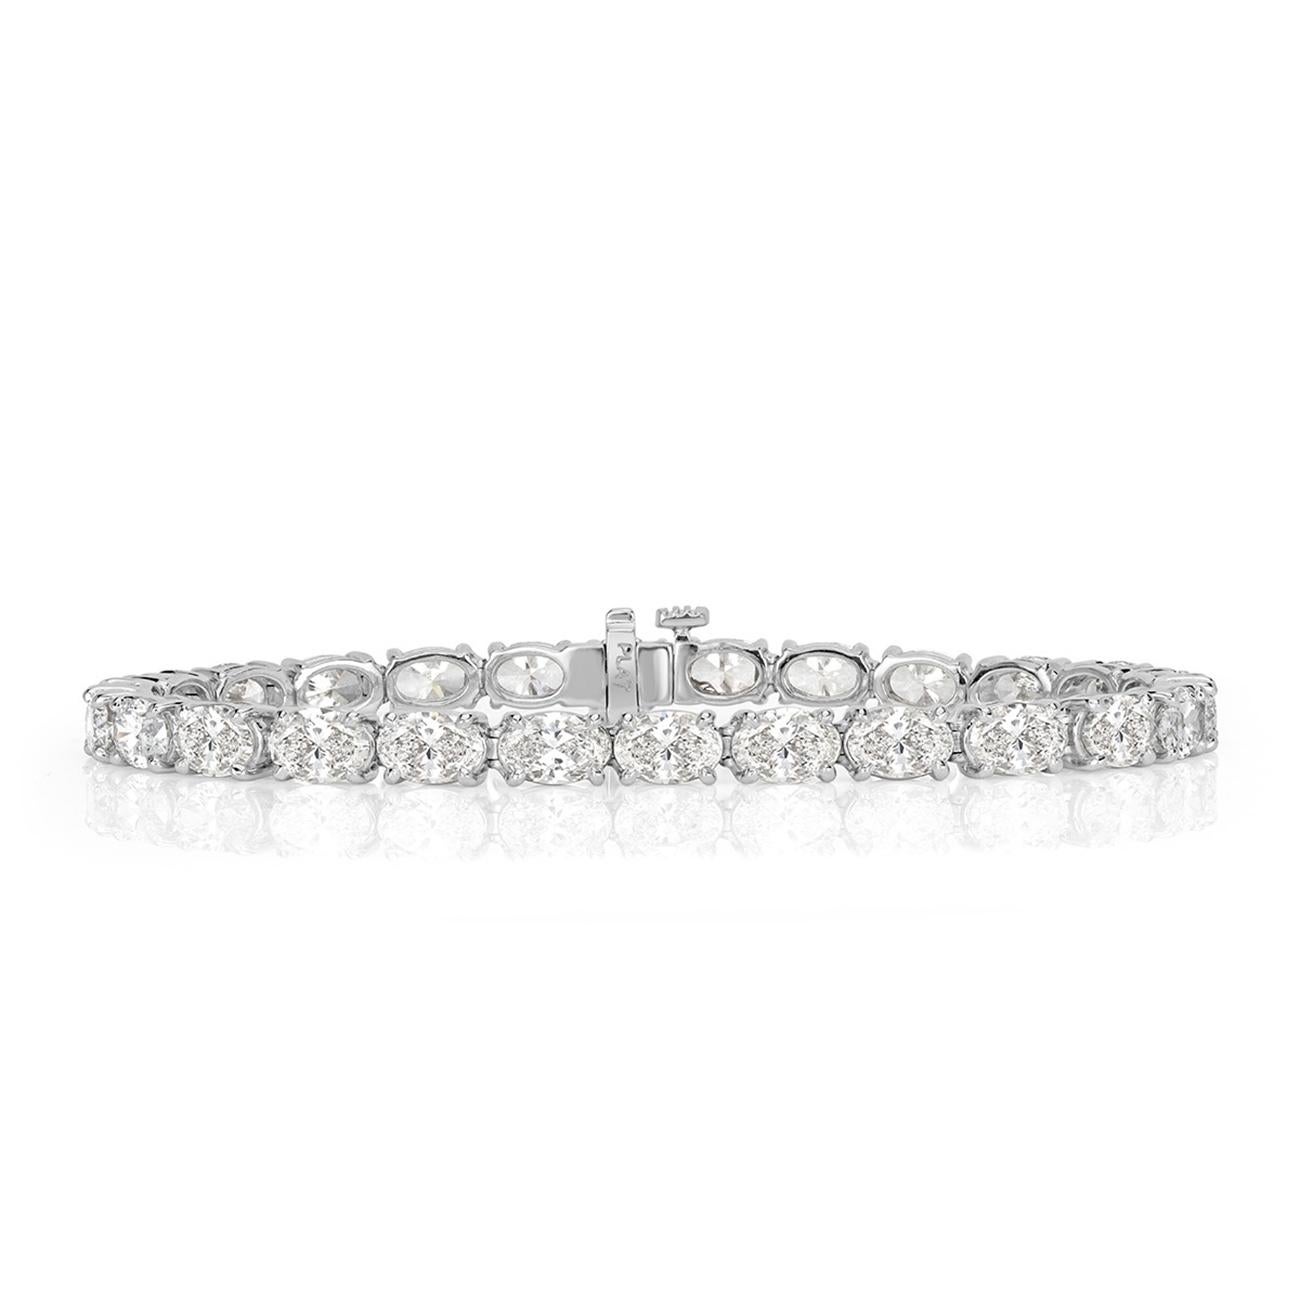 Oval Cut Tennis Bracelet East-to-West w/ GIA G-H/SI1-SI2 Oval Diamonds. D14.06ct. For Sale